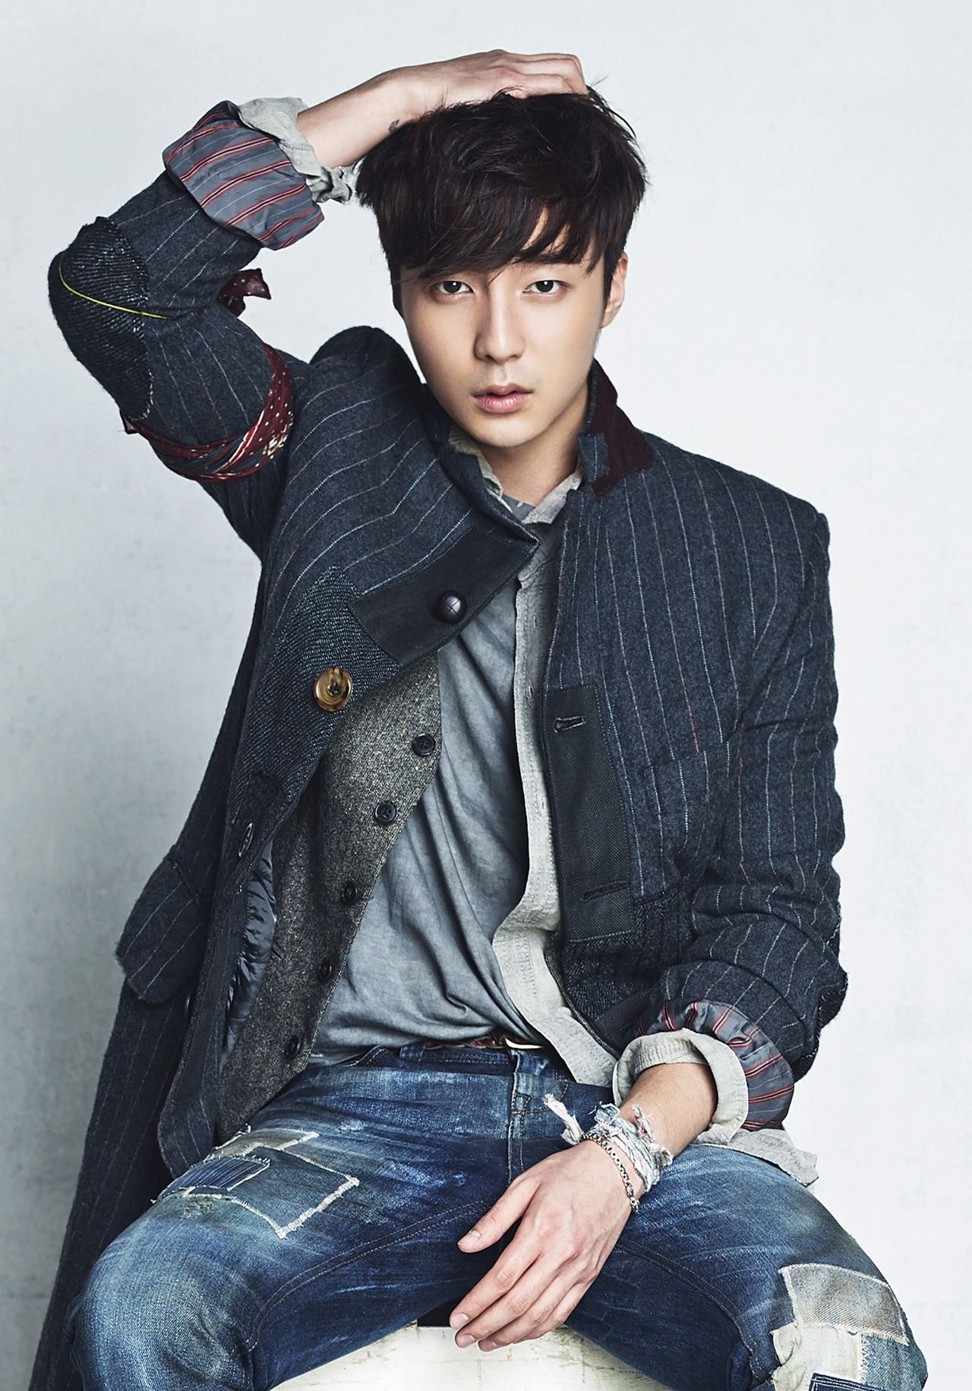 Roy Kim is being investigated for allegedly sharing explicit photos in a group chat.